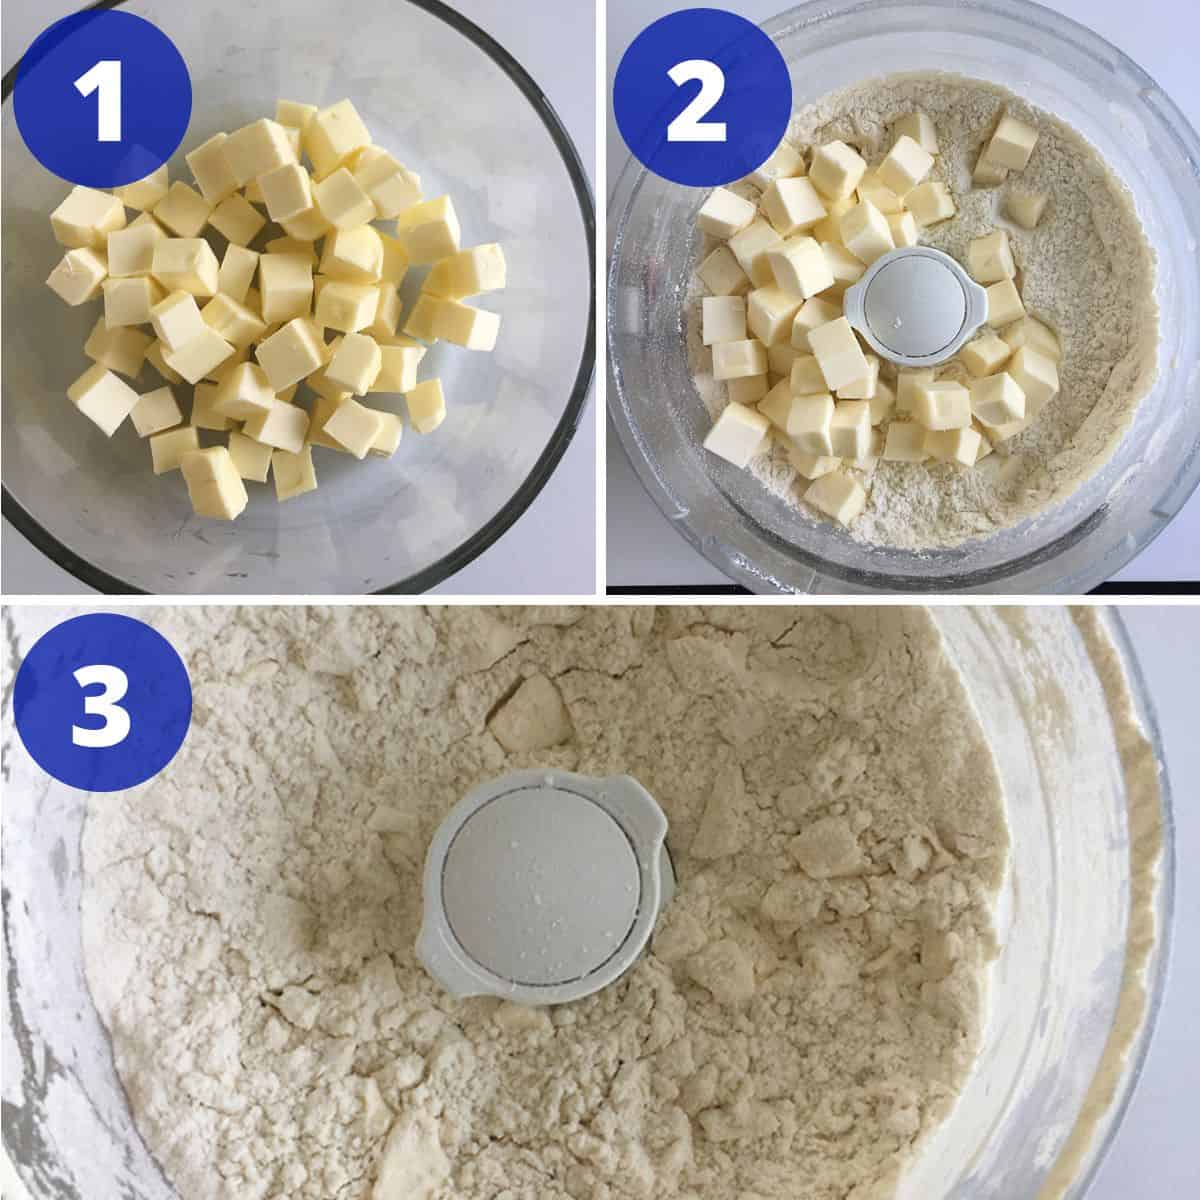 Process for mixing butter pie crust in Food Processor.